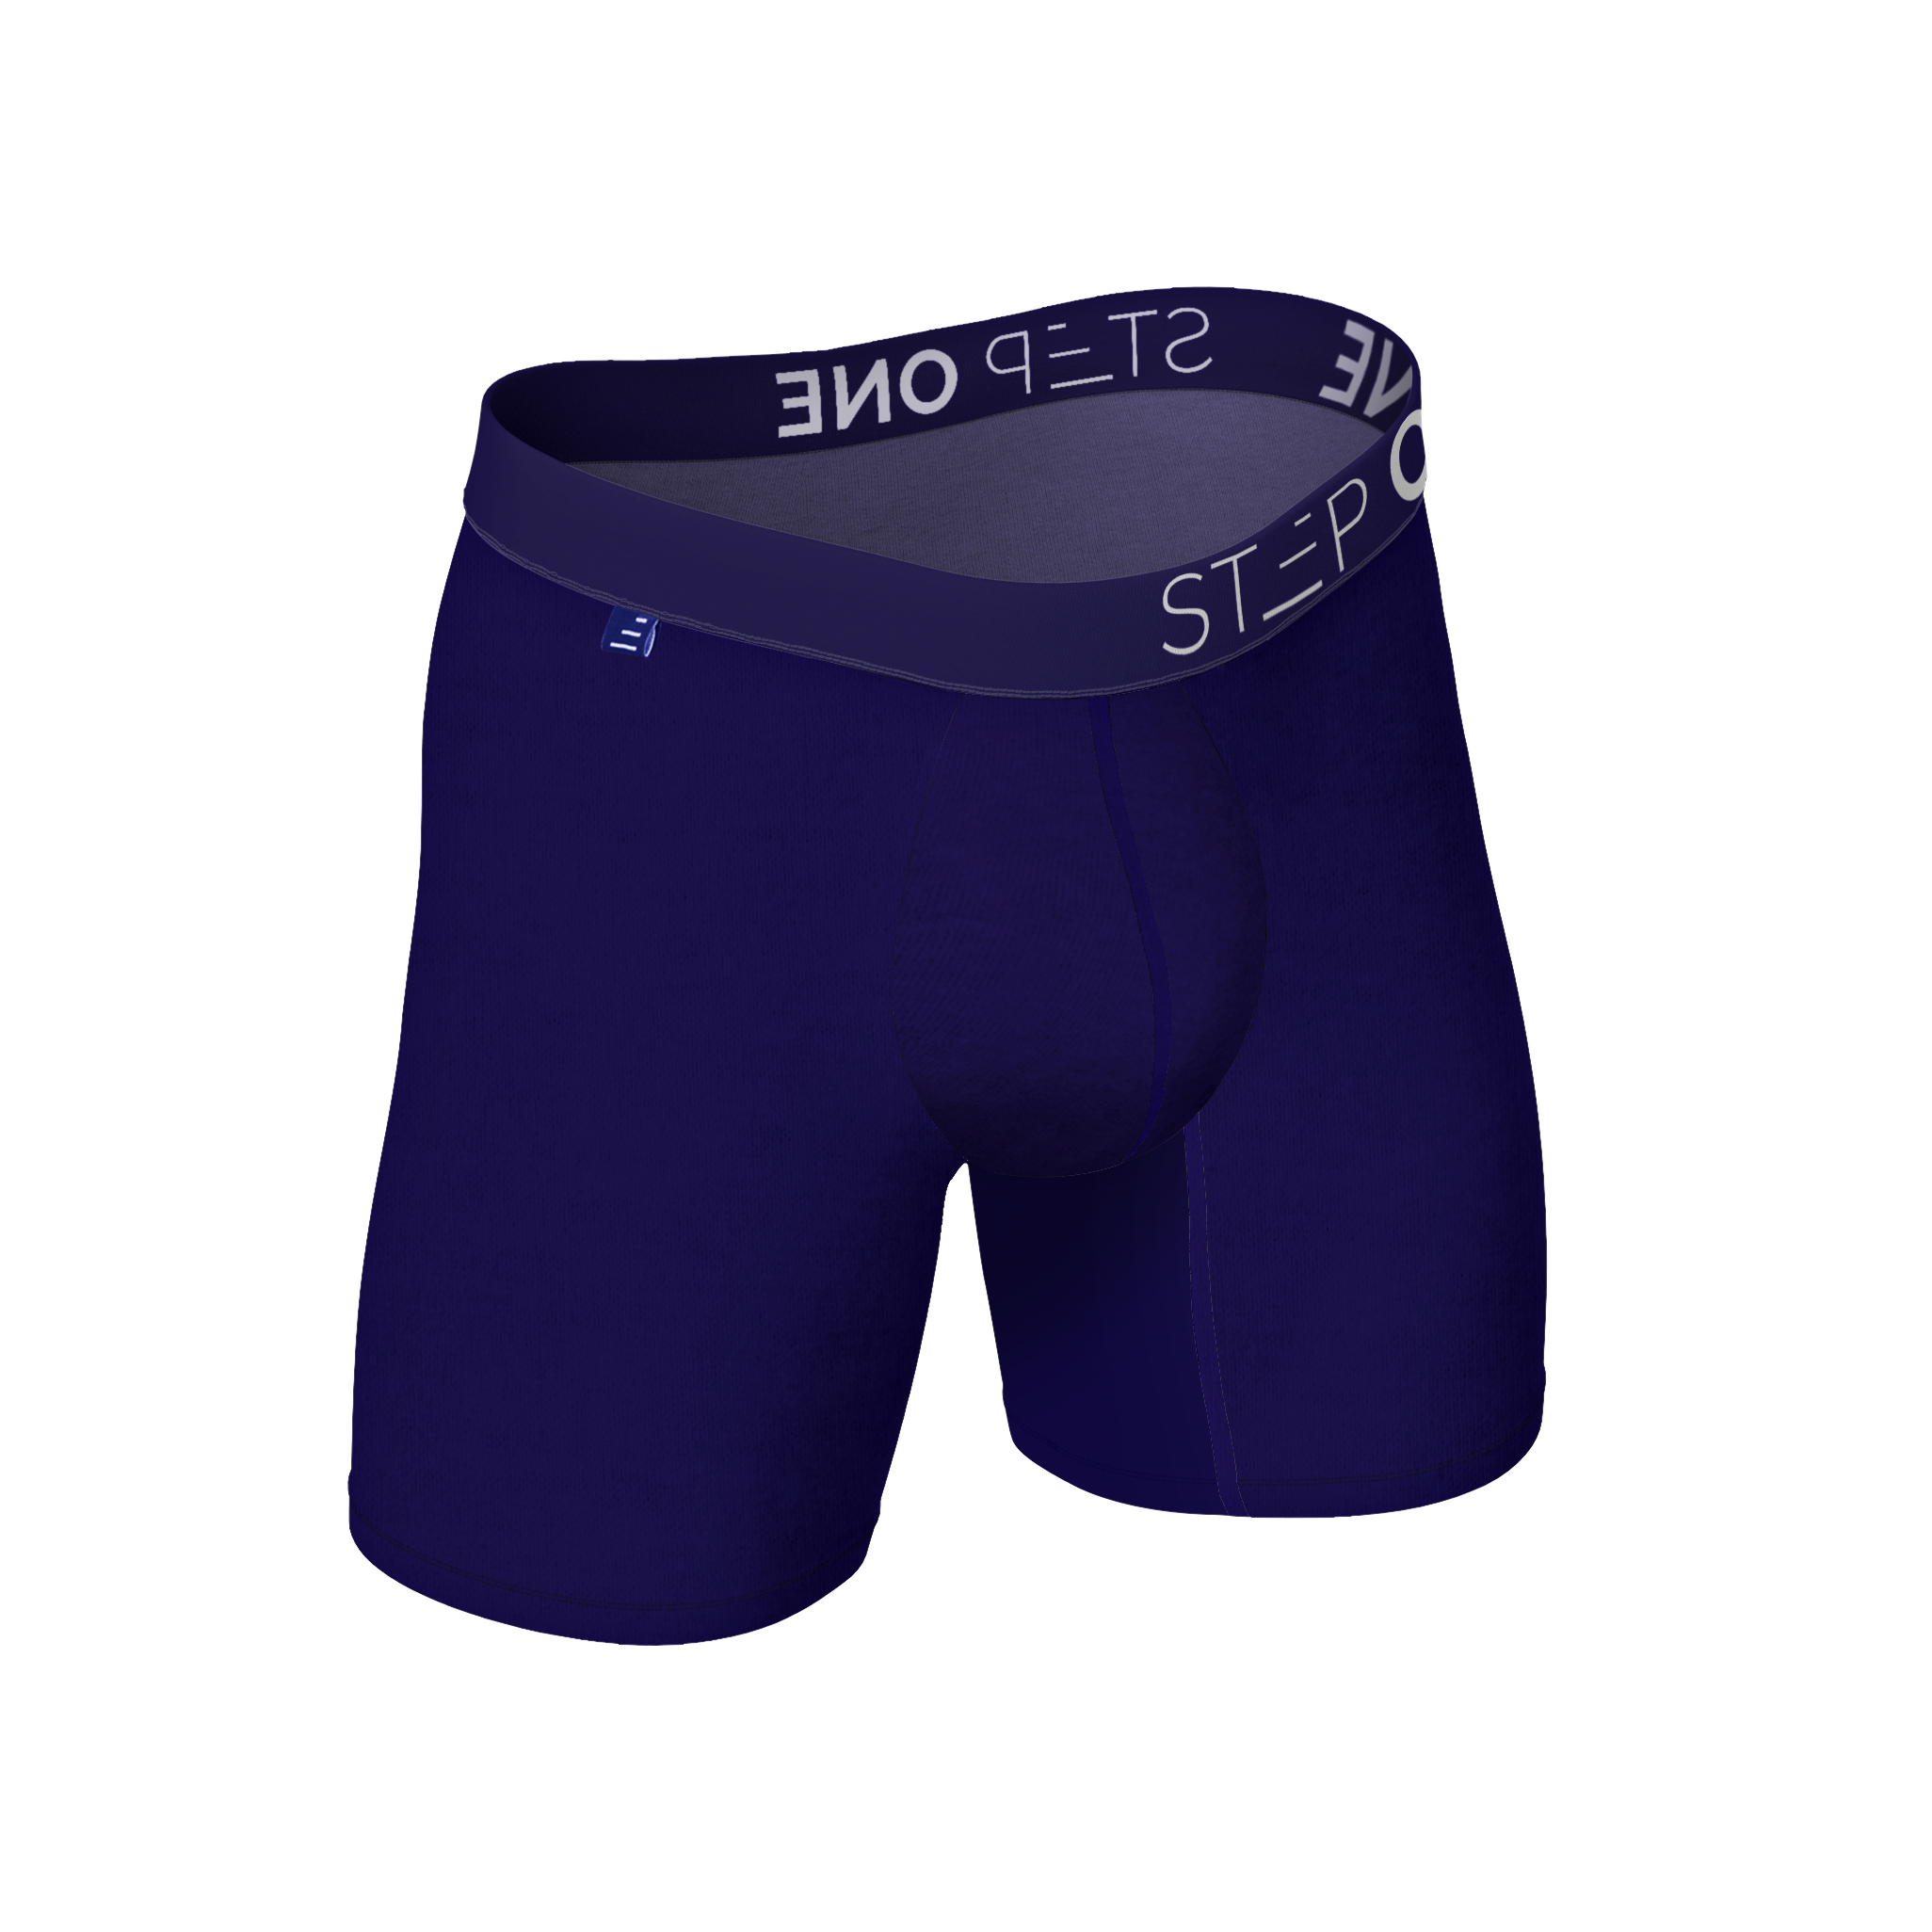 Boxer Brief - Midnight Blues - View 4